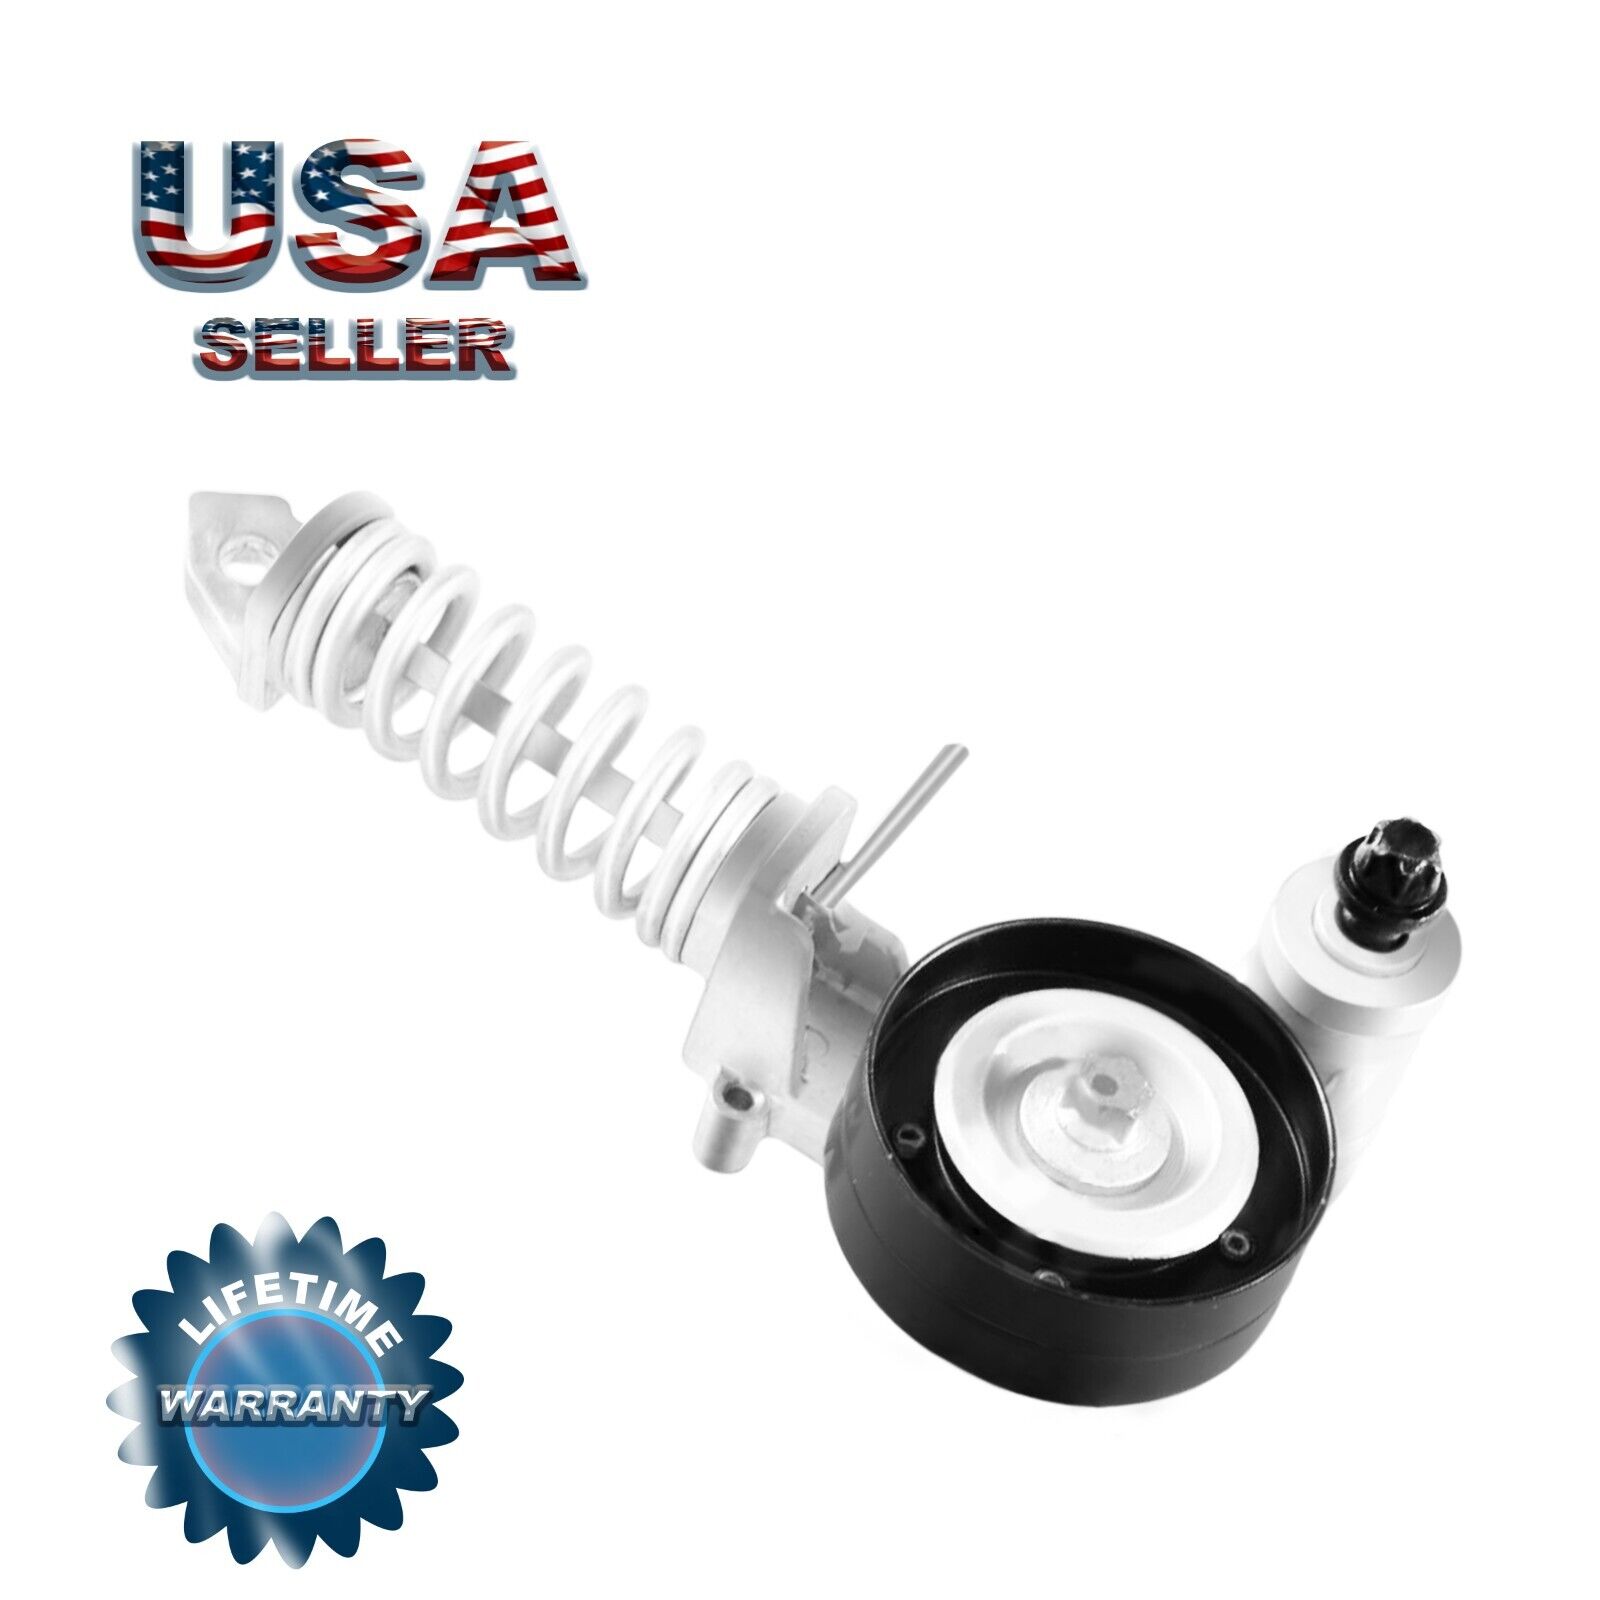 25195388 Belt Tensioner for for 11-15 Chevy Cruze 12-20 Sonic 15-21 Trax 1.4L US